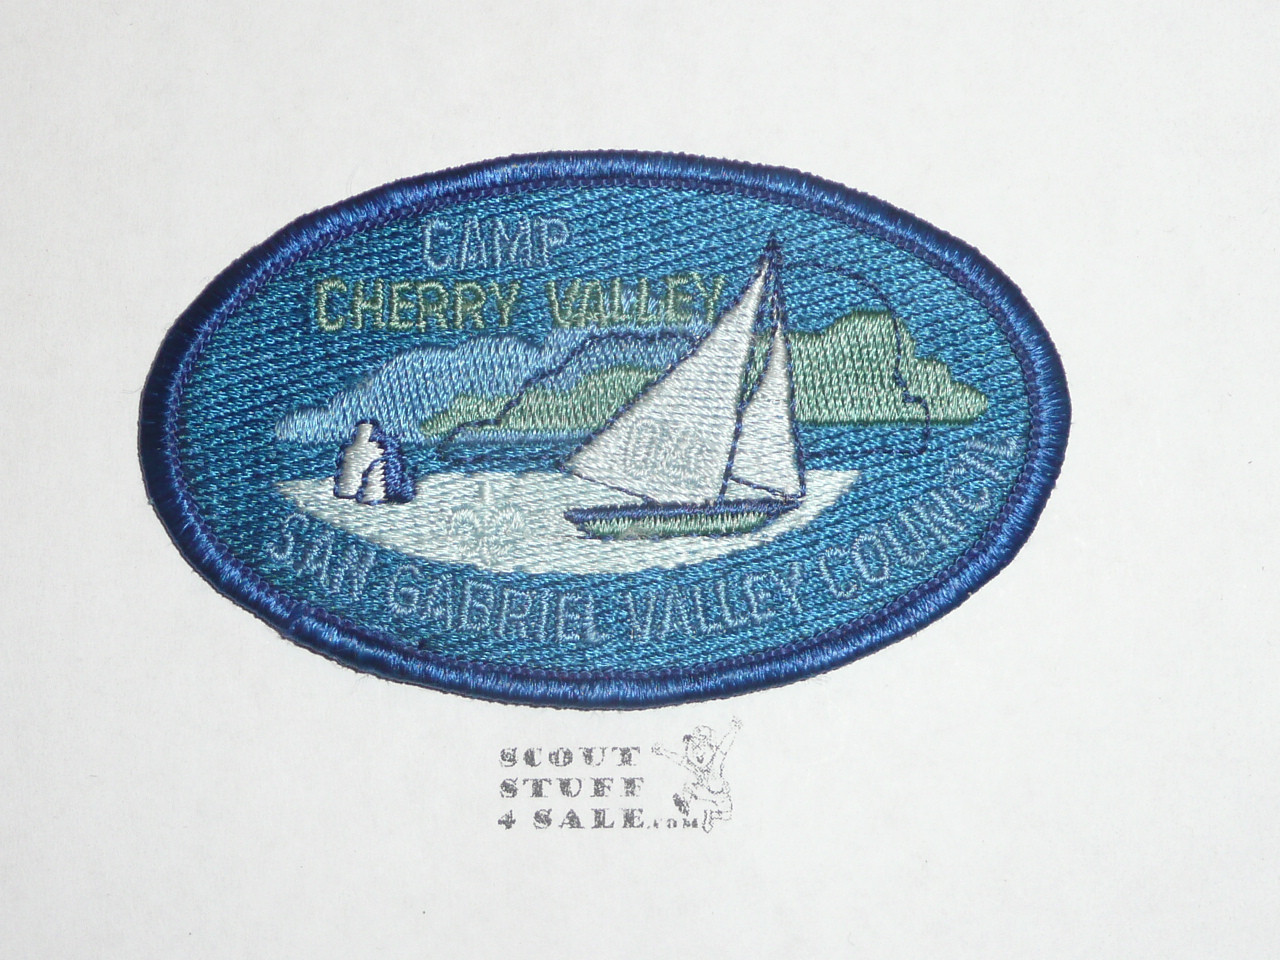 Camp Cherry Valley Patch, San Gabriel Valley Council